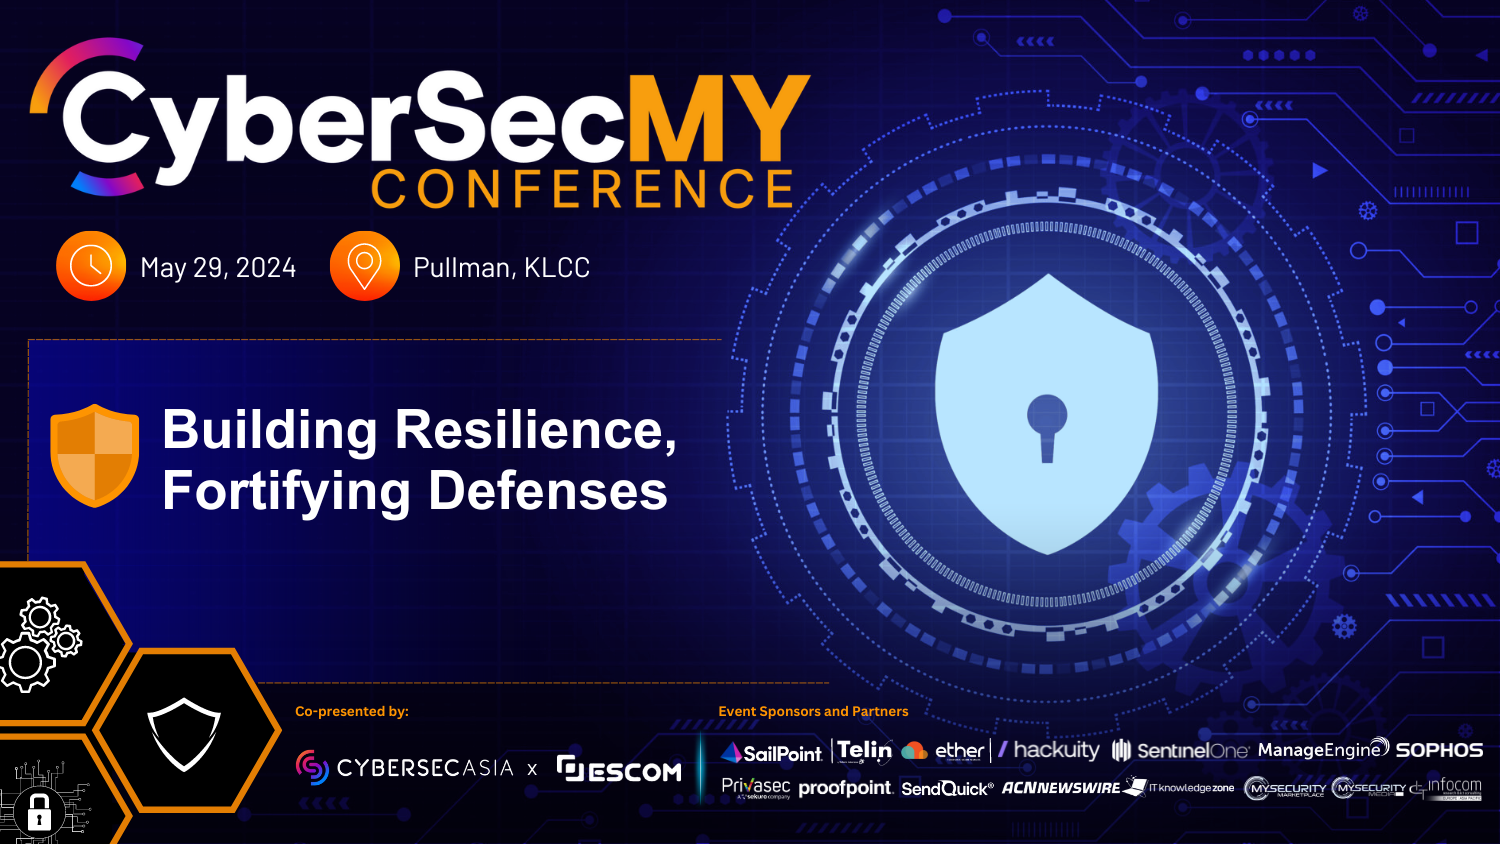 Cybersecurity Malaysia Conference 2024 (CyberSecMalaysia) organized by Escom Events